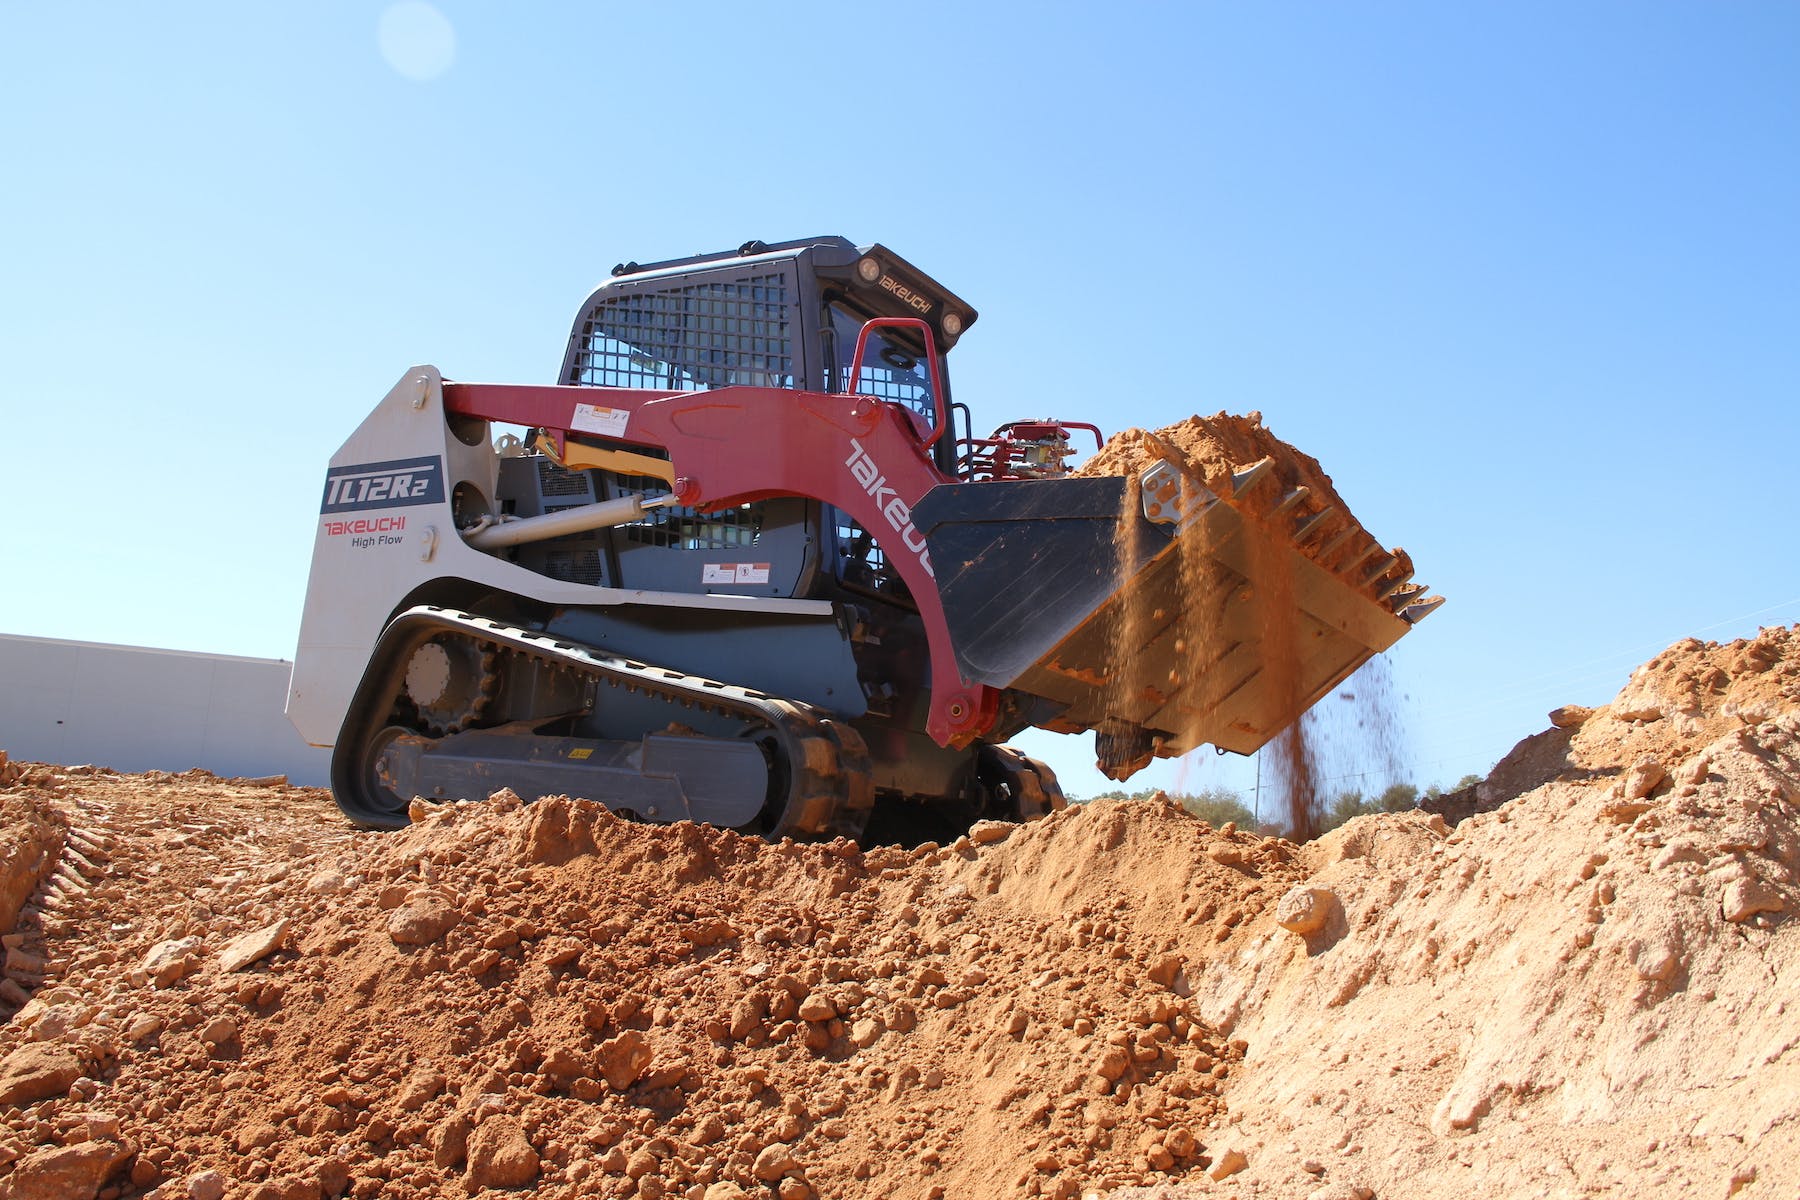 Takeuchi TL12R2 compact track loader side view above dirt hole hauling dirt in bucket